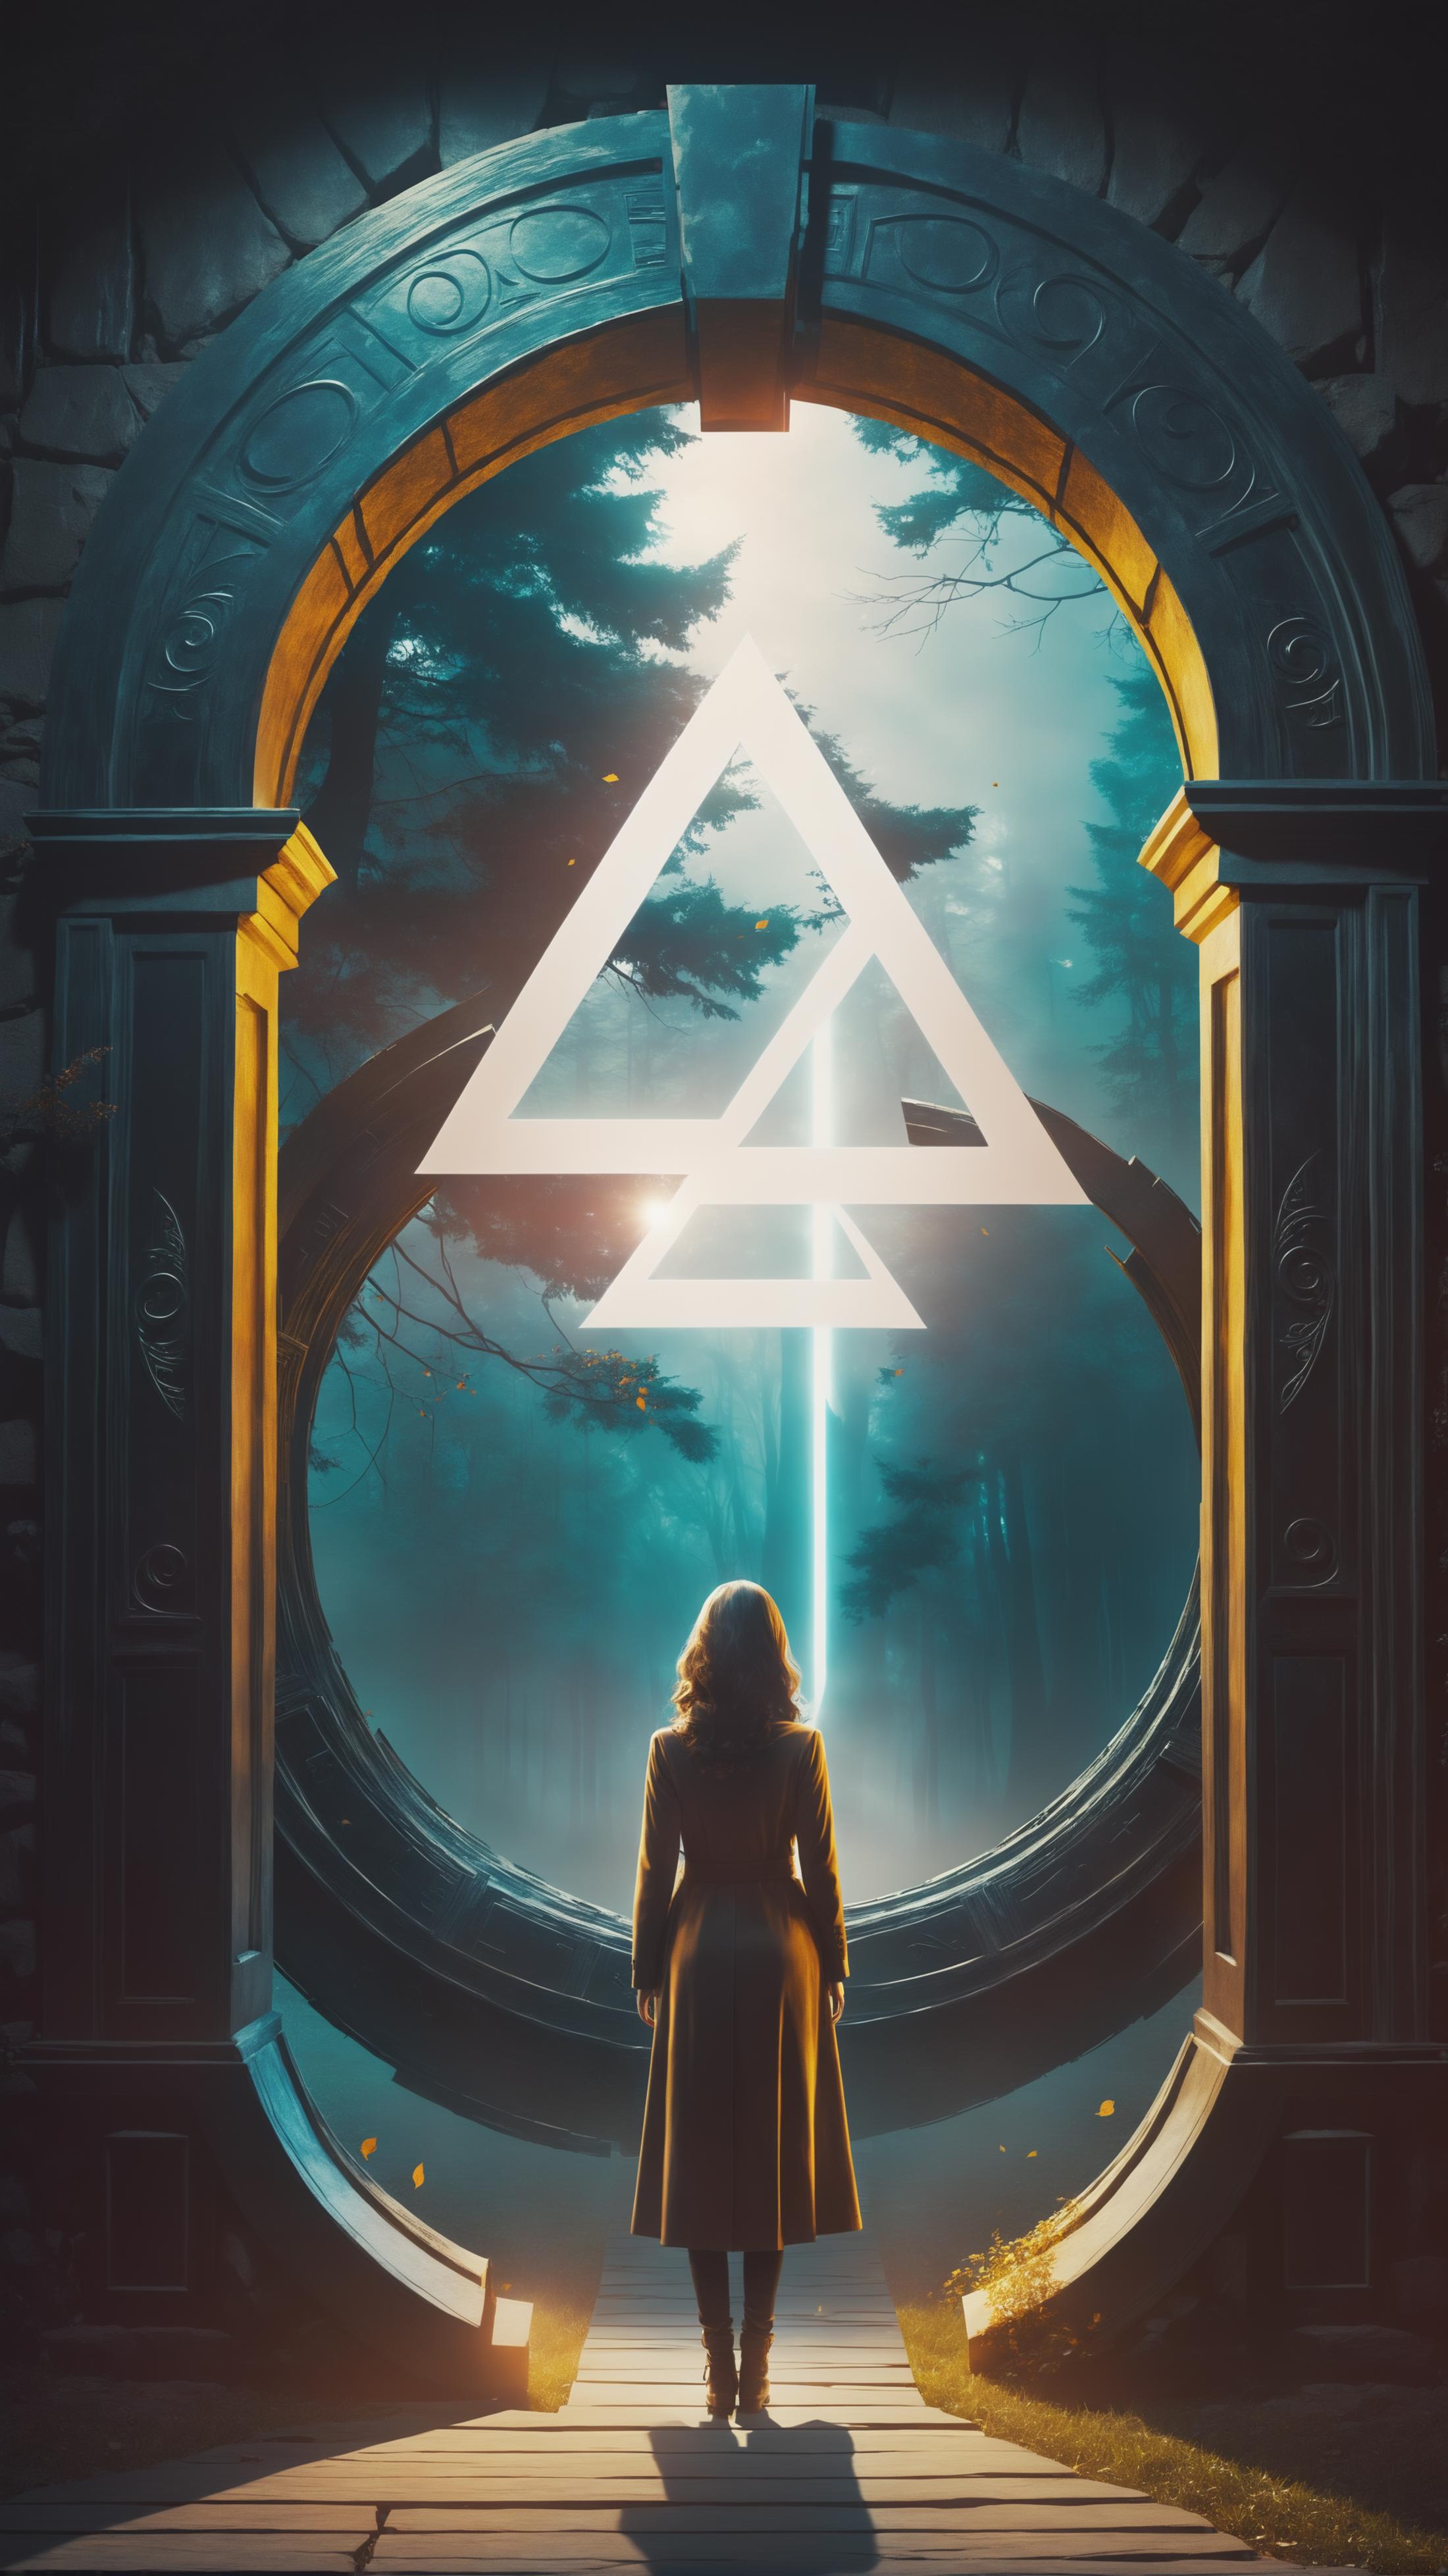 A woman standing in front of a mysterious archway with a triangular symbol above it.